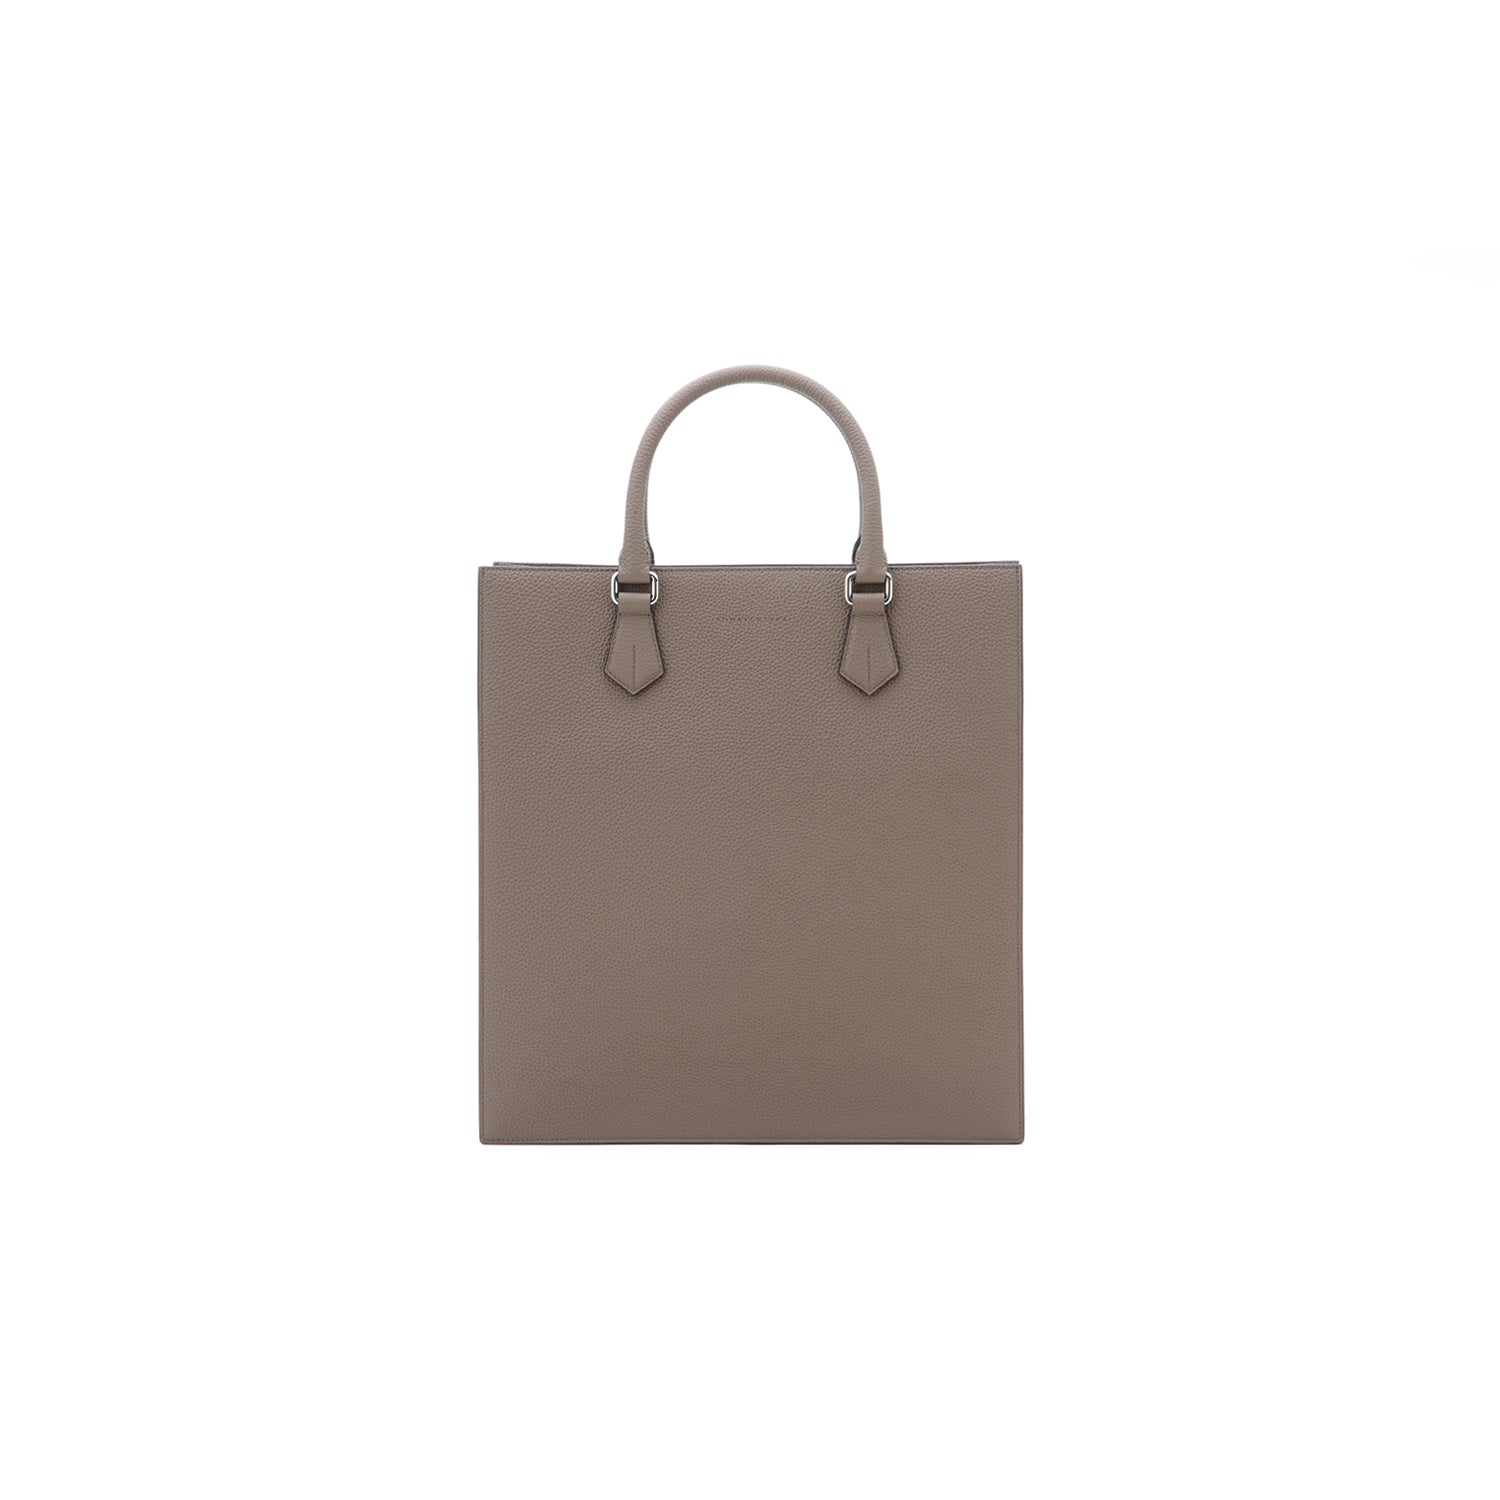 Marco Tote Bag in Shrink Leather Etoupe